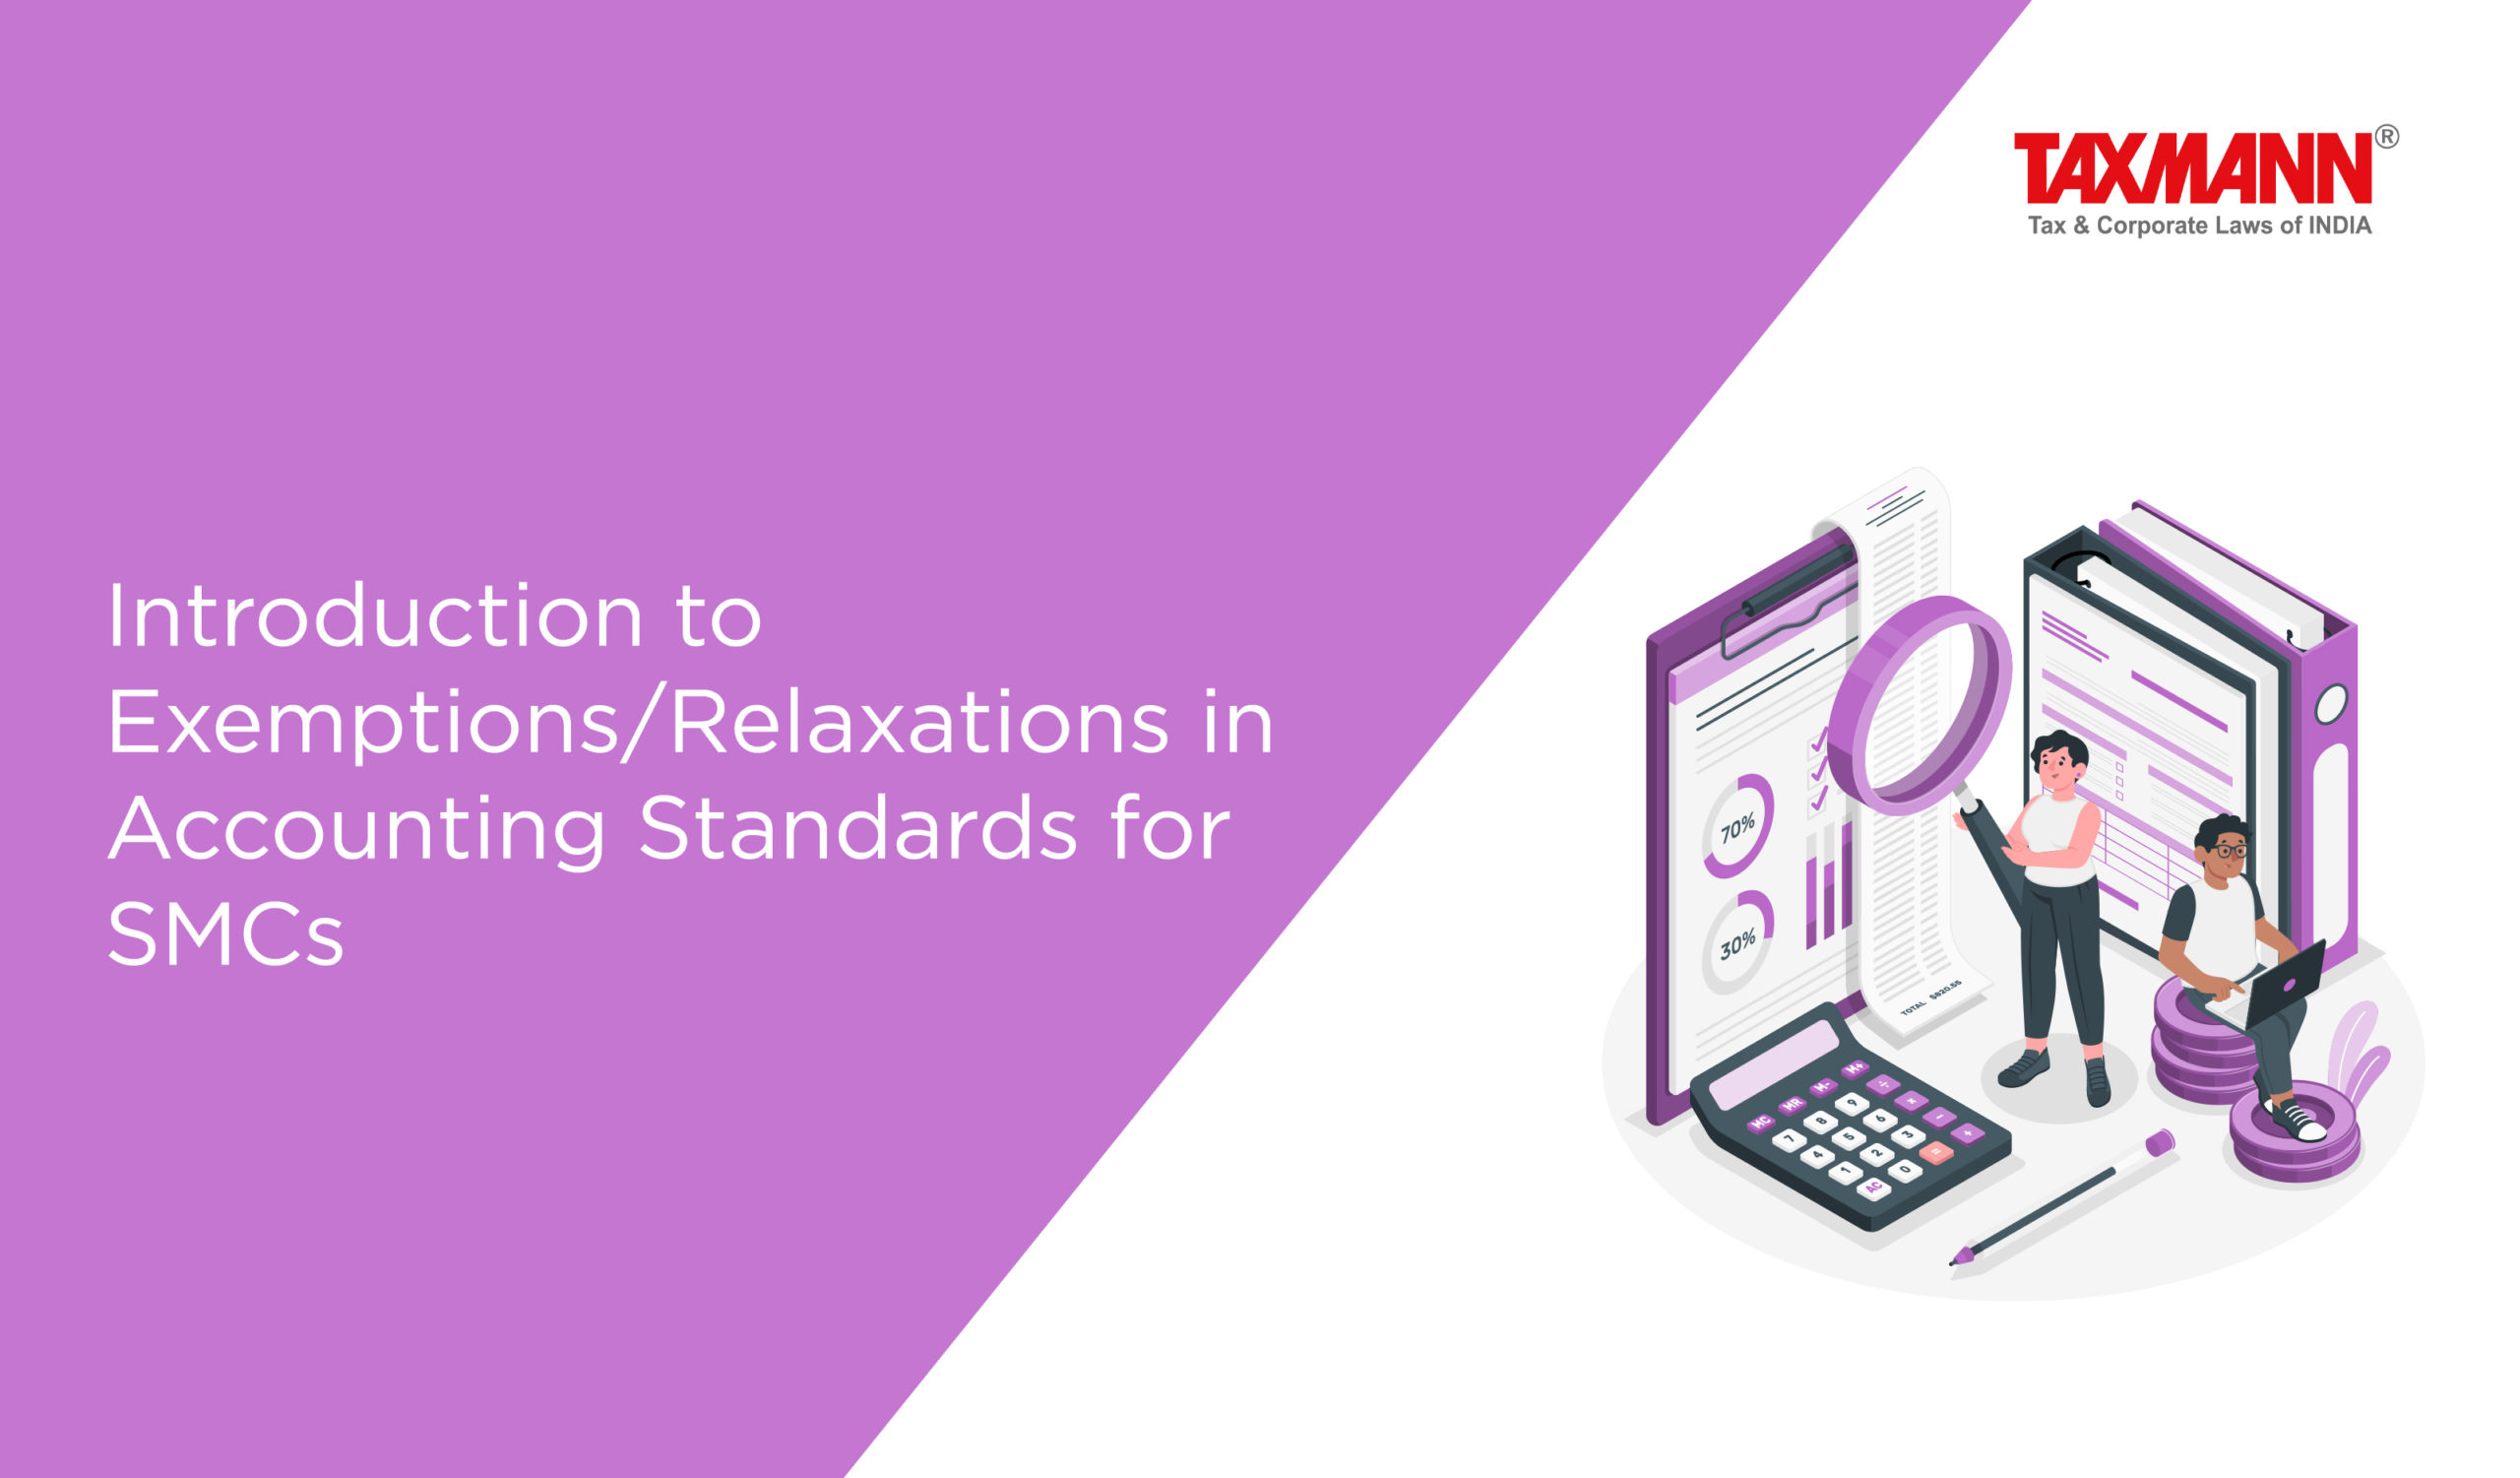 Accounting Standards for SMCs